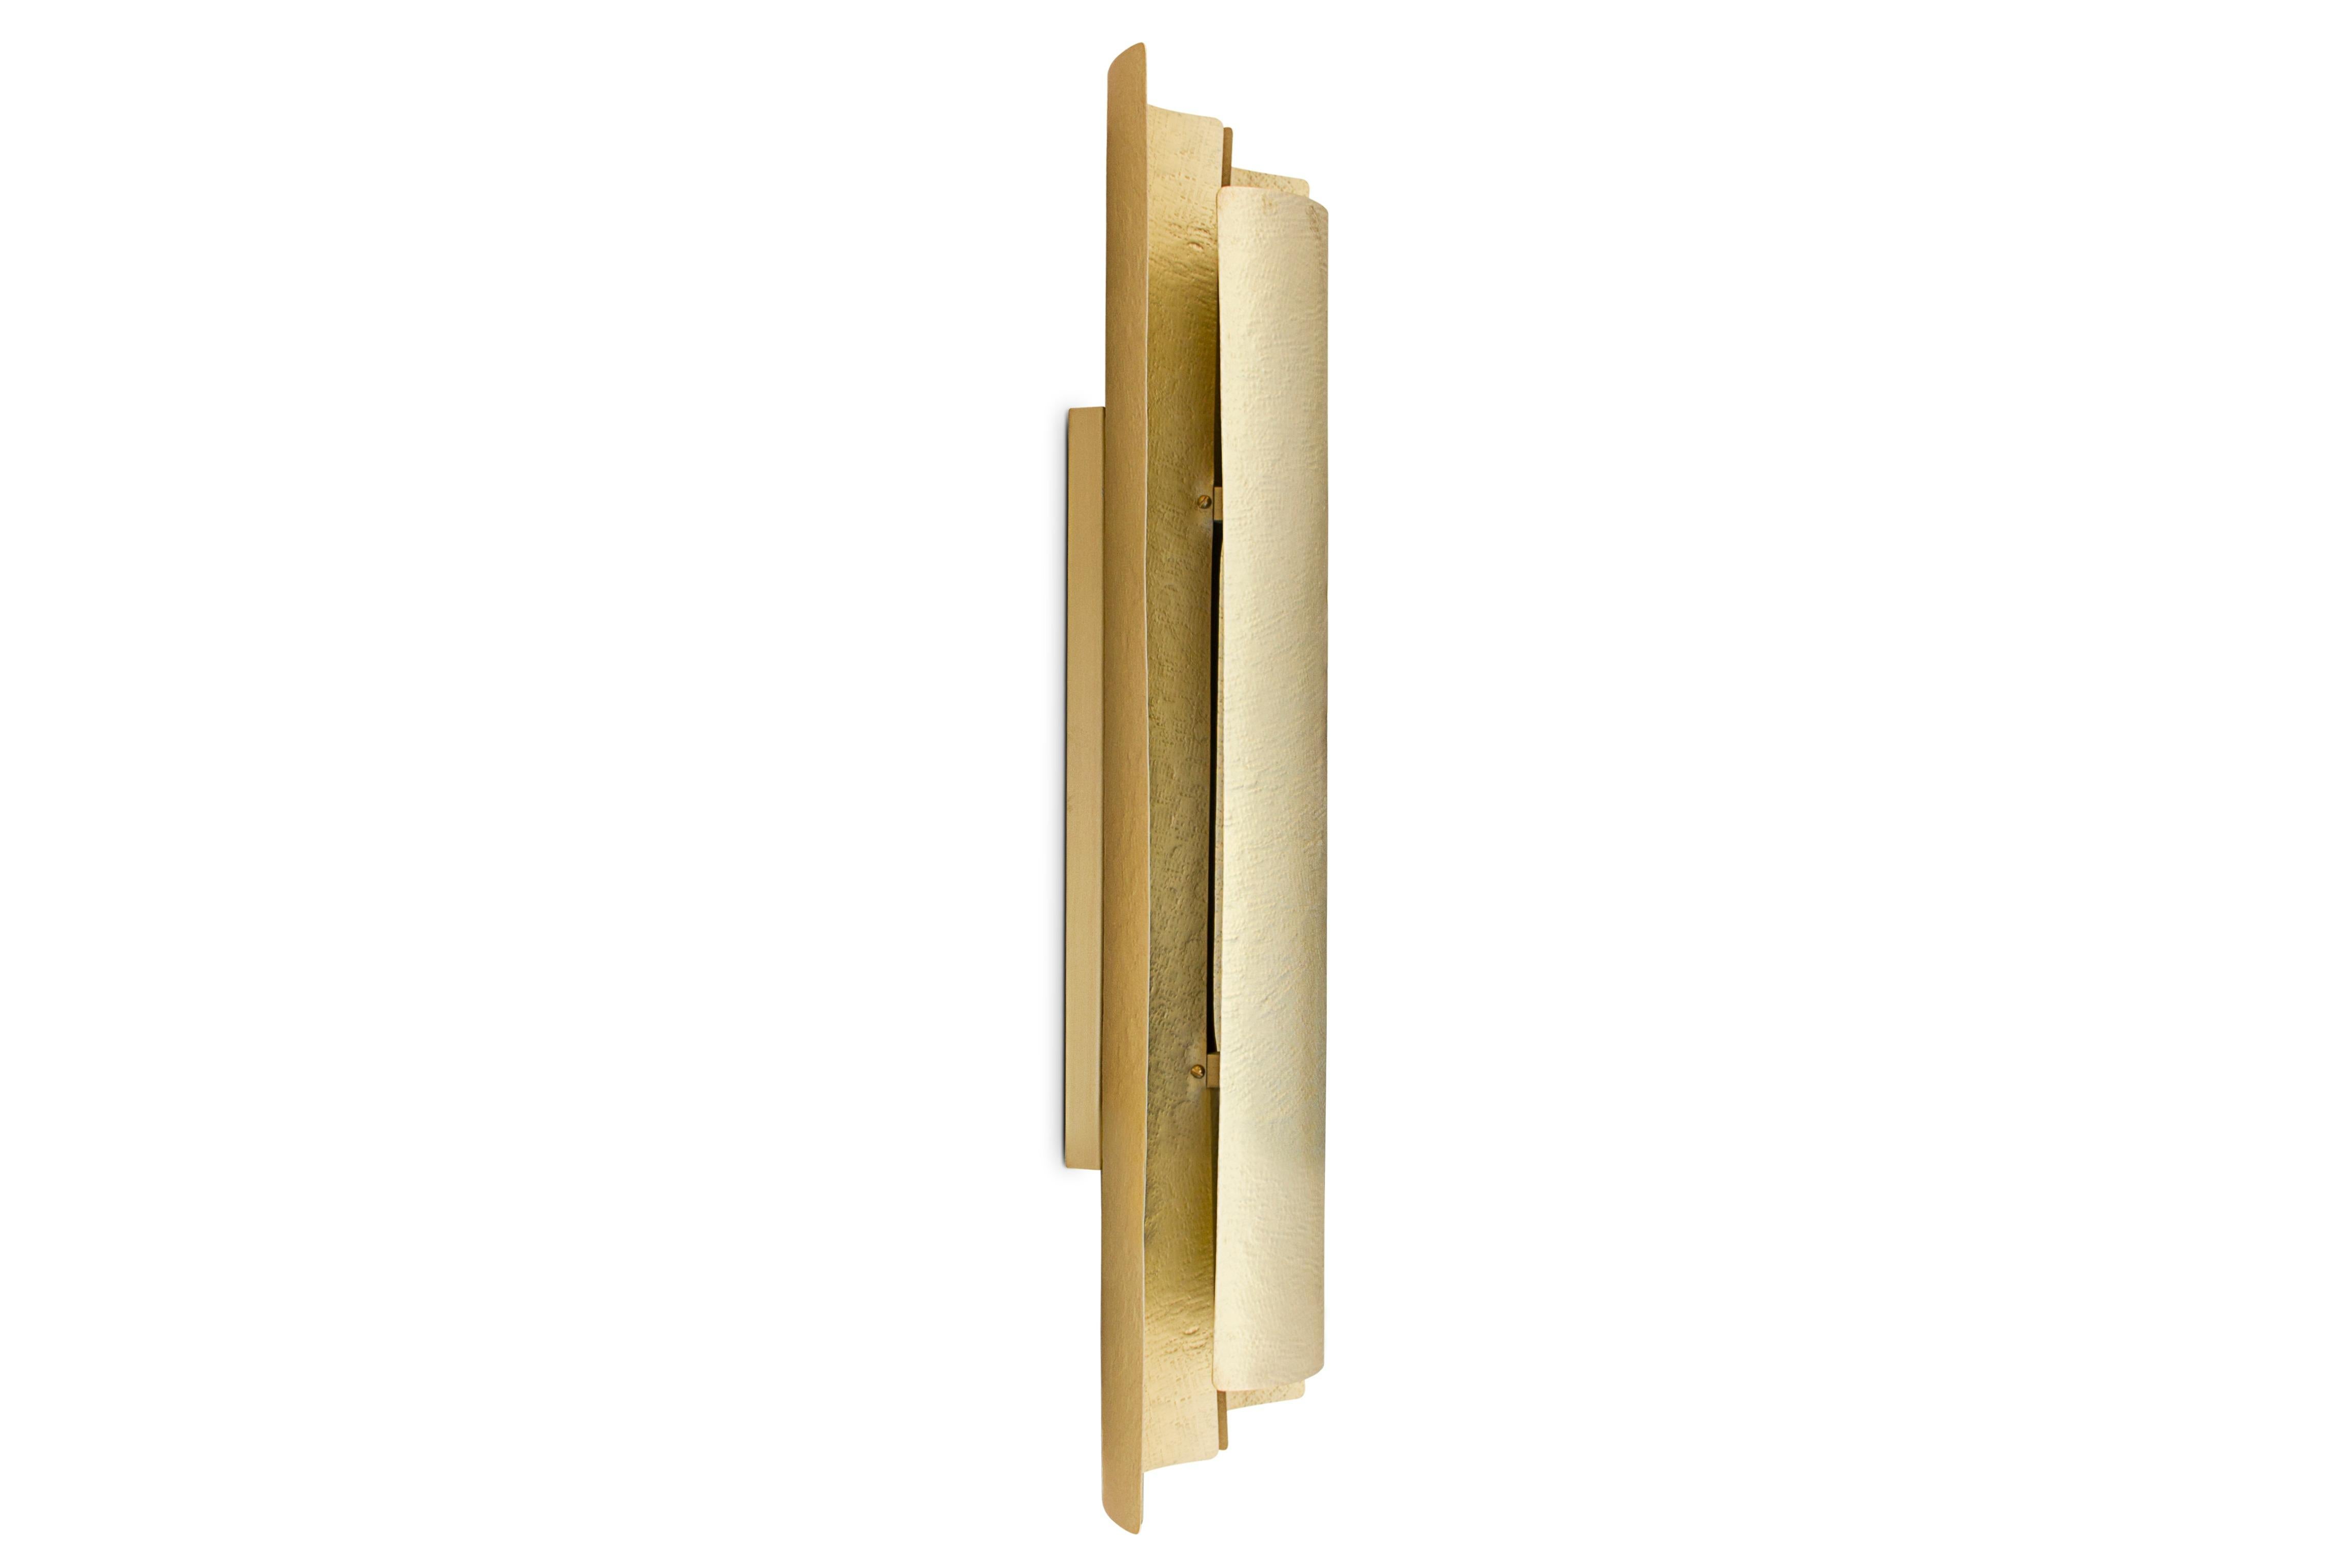 Aurum is the Latin word for gold. This imposing metal also named a contemporary lighting piece made of matte hammered brass. With a unique design, Aurum wall light will bring comfort in the darkest nights with its warm yet sensitive light. This